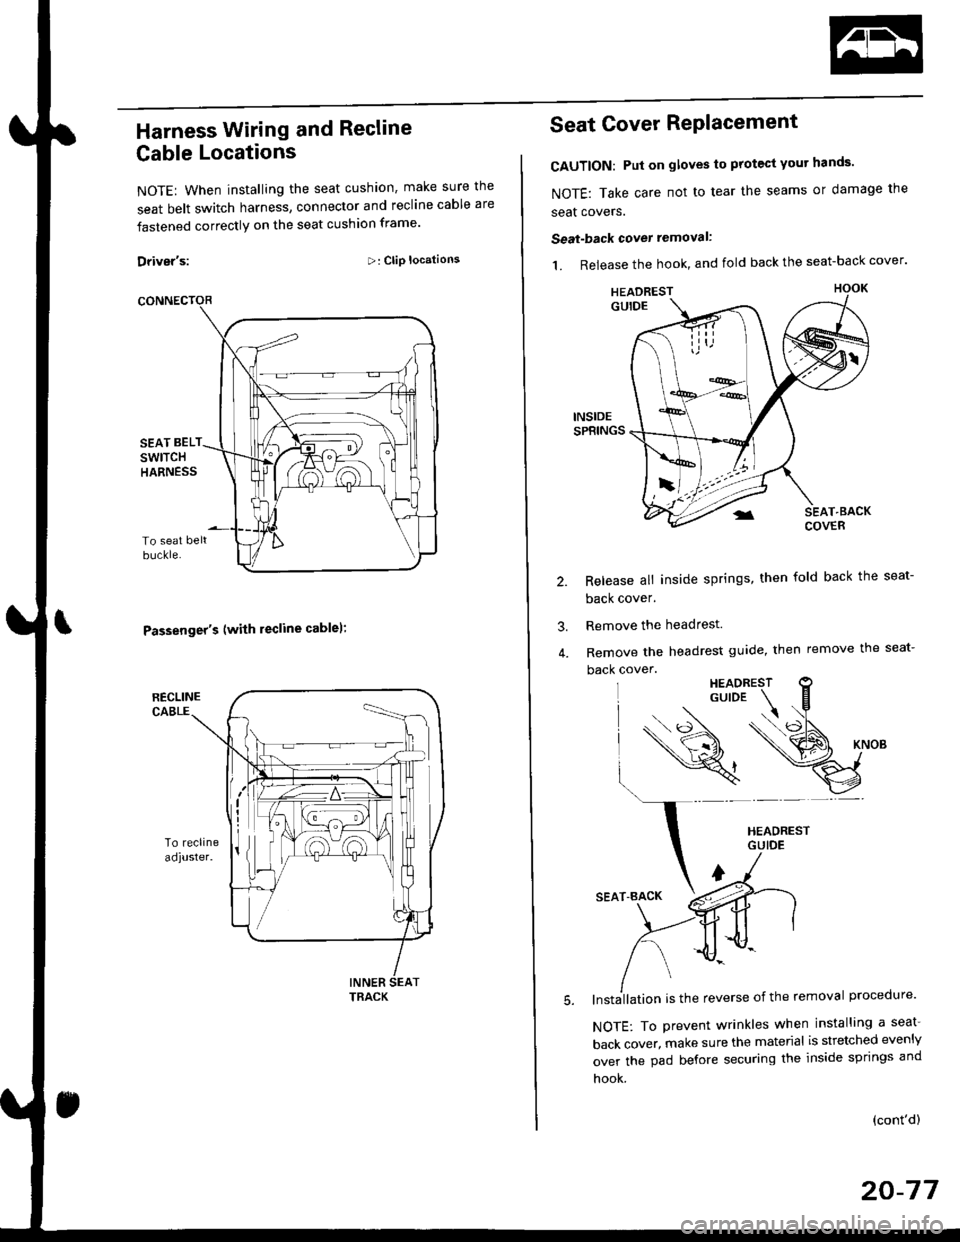 HONDA CIVIC 1999 6.G Workshop Manual Harness Wiring and Recline
Cable Locations
NOTE: When installing the seat cushion, make sure the
seat belt switch harness, connector and recline cable are
fastened correctly on the seat cushion frame